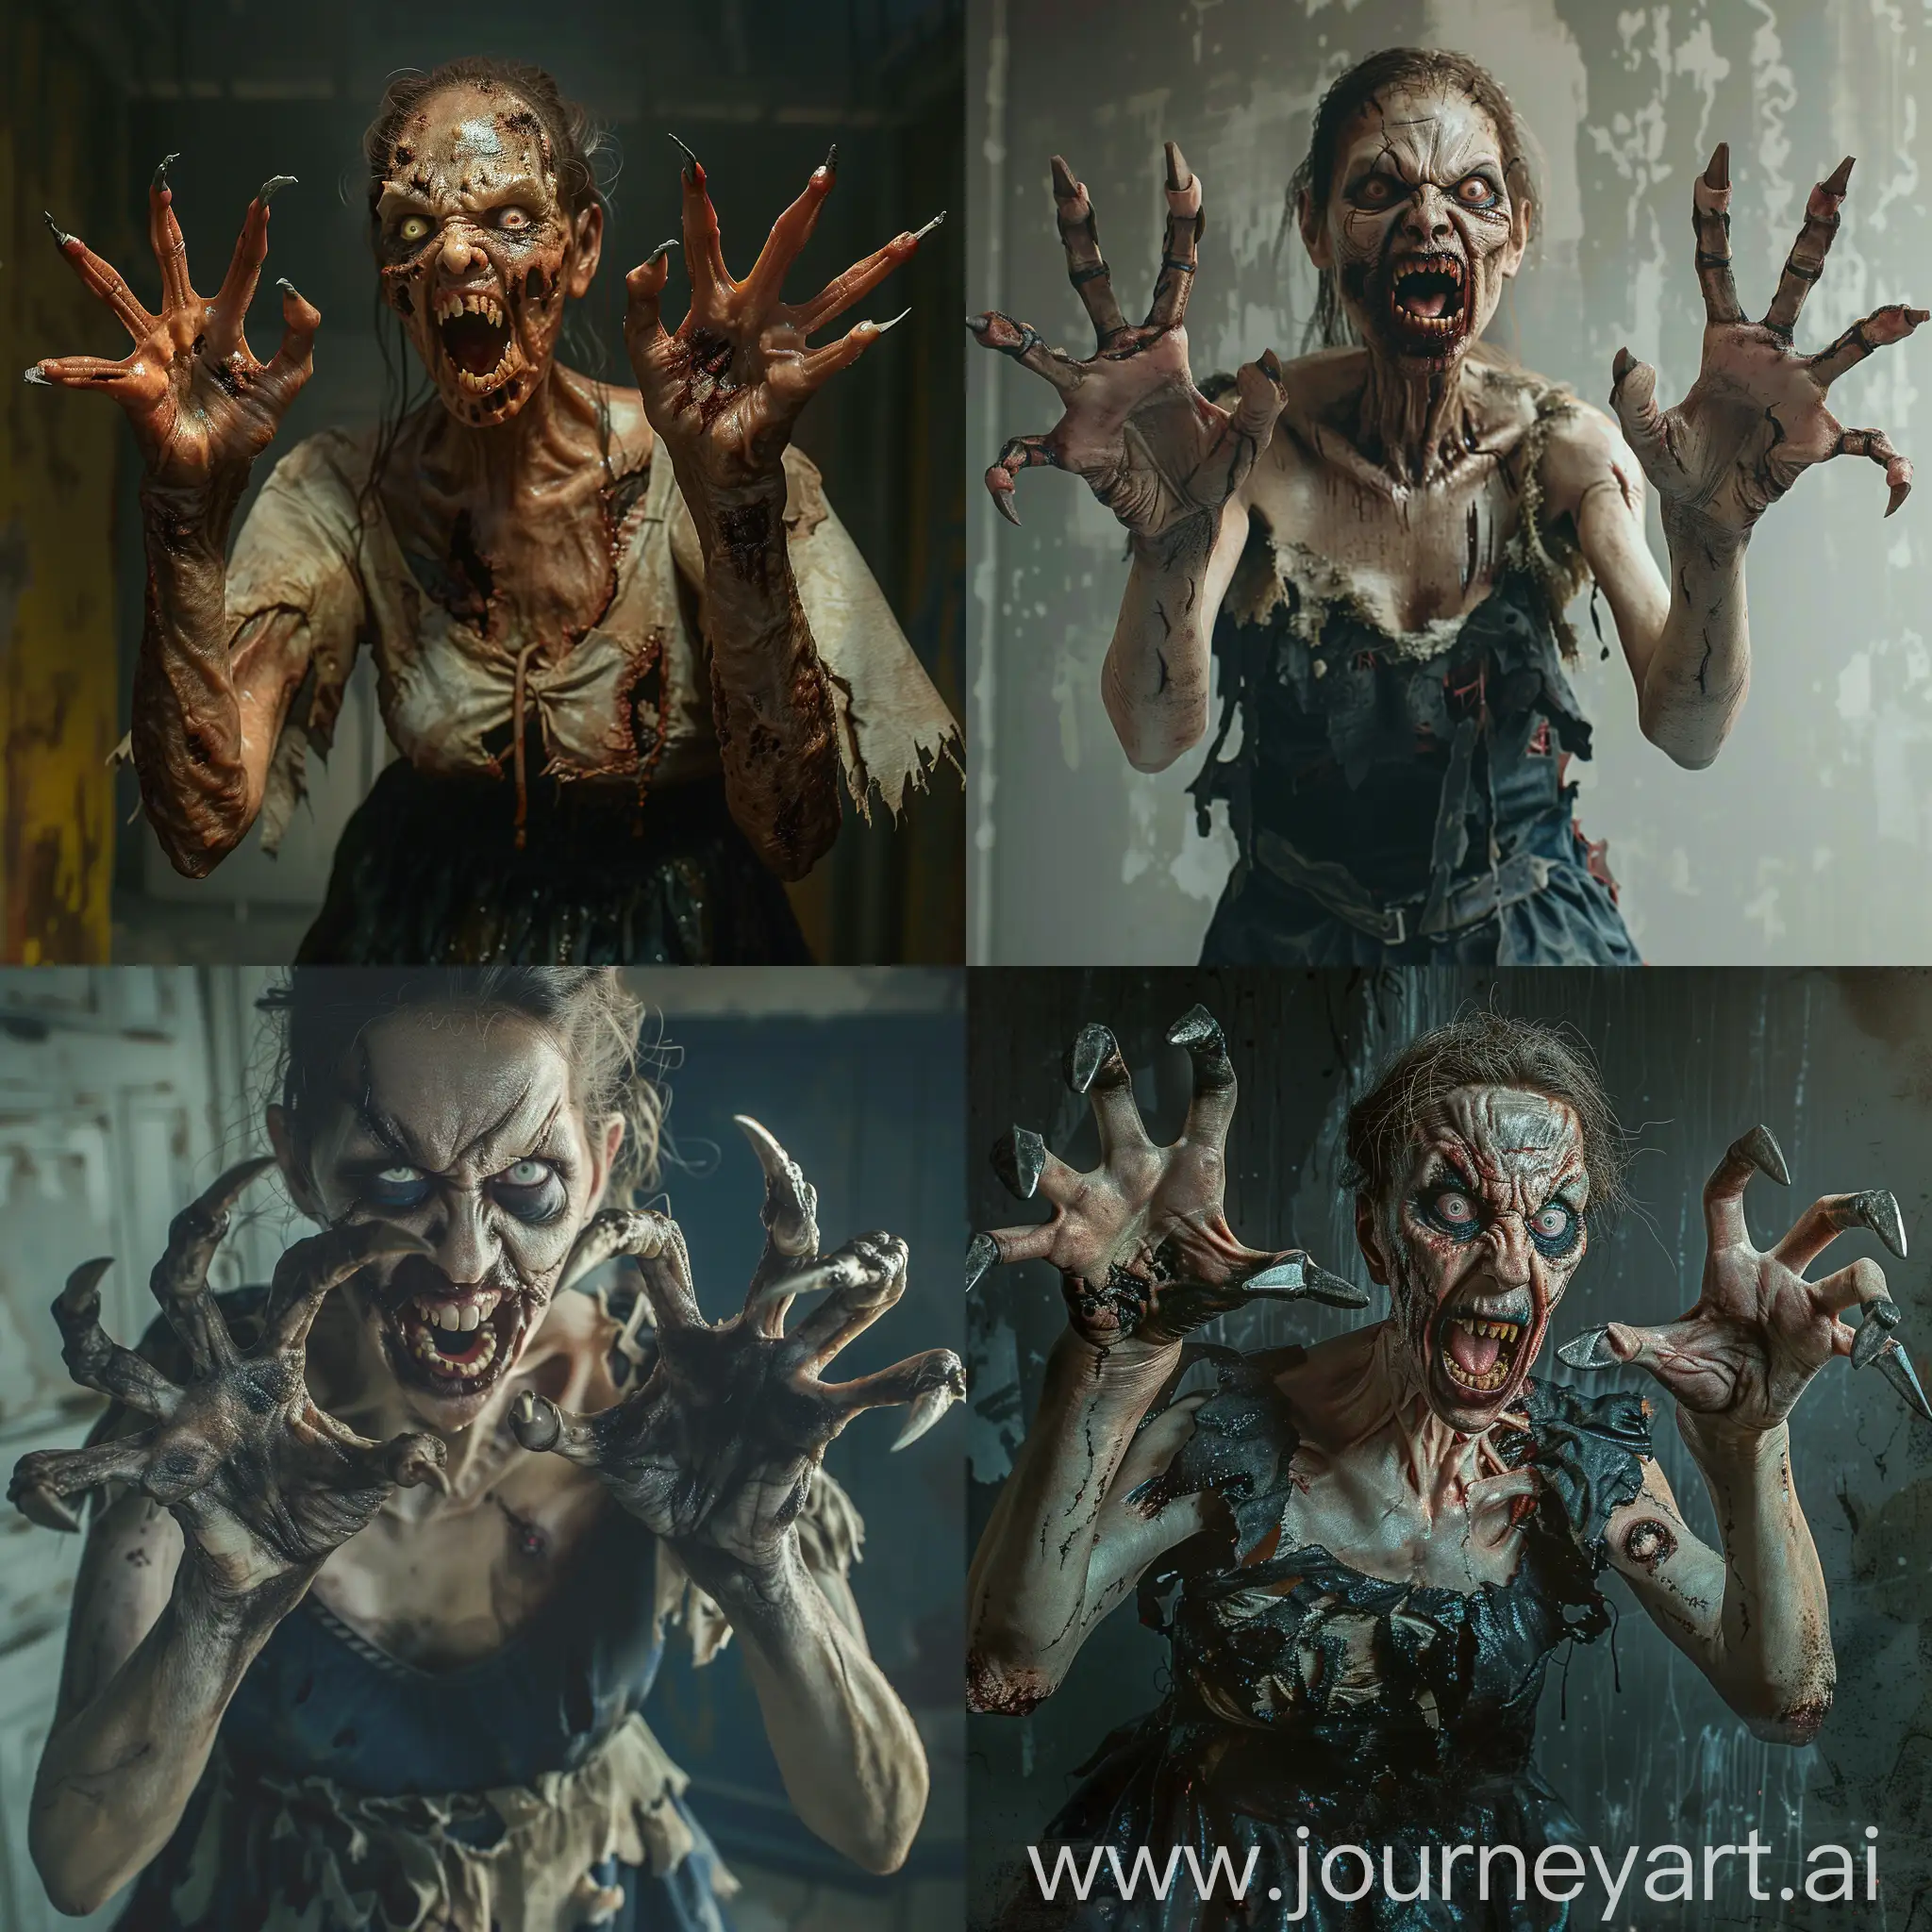 a terrible zombie woman with clawed hands stretches her two hands with five fingers on each, her mouth exposes terrible fangs, she has a wild look, she is dressed in torn clothes black with soot and dirt, on her hands pointed long nails that bend like hooks, her eyes are empty and reddish, the scene shows her terrible figure, hyper-realism, cinematography, high detail, the smallest details, horror, fear.photorealistic photography of a zombie woman with no eyes and a tattered dress, in the style of realistic hyper - detail, playful character designs, 32k uhd, full anatomical. human hands, very clear without flaws with five fingers